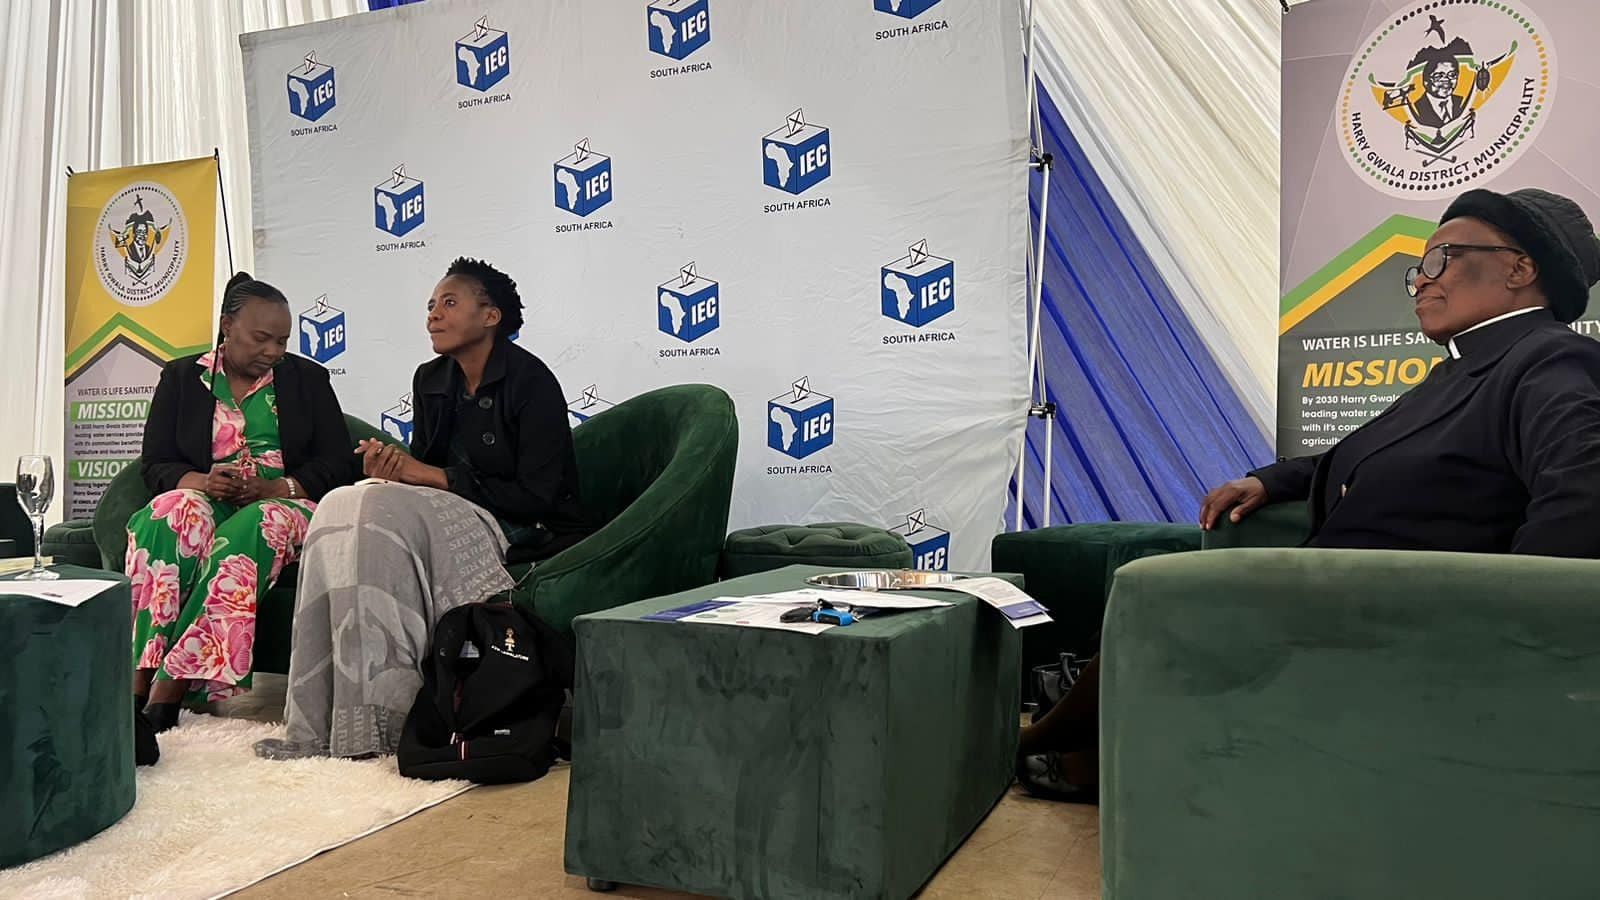 Harry Gwala District Municipality, in partnership with The Independent Electoral Commission(IEC), gathered at the Umzimkhulu TVET College in Commemoration of Women's month